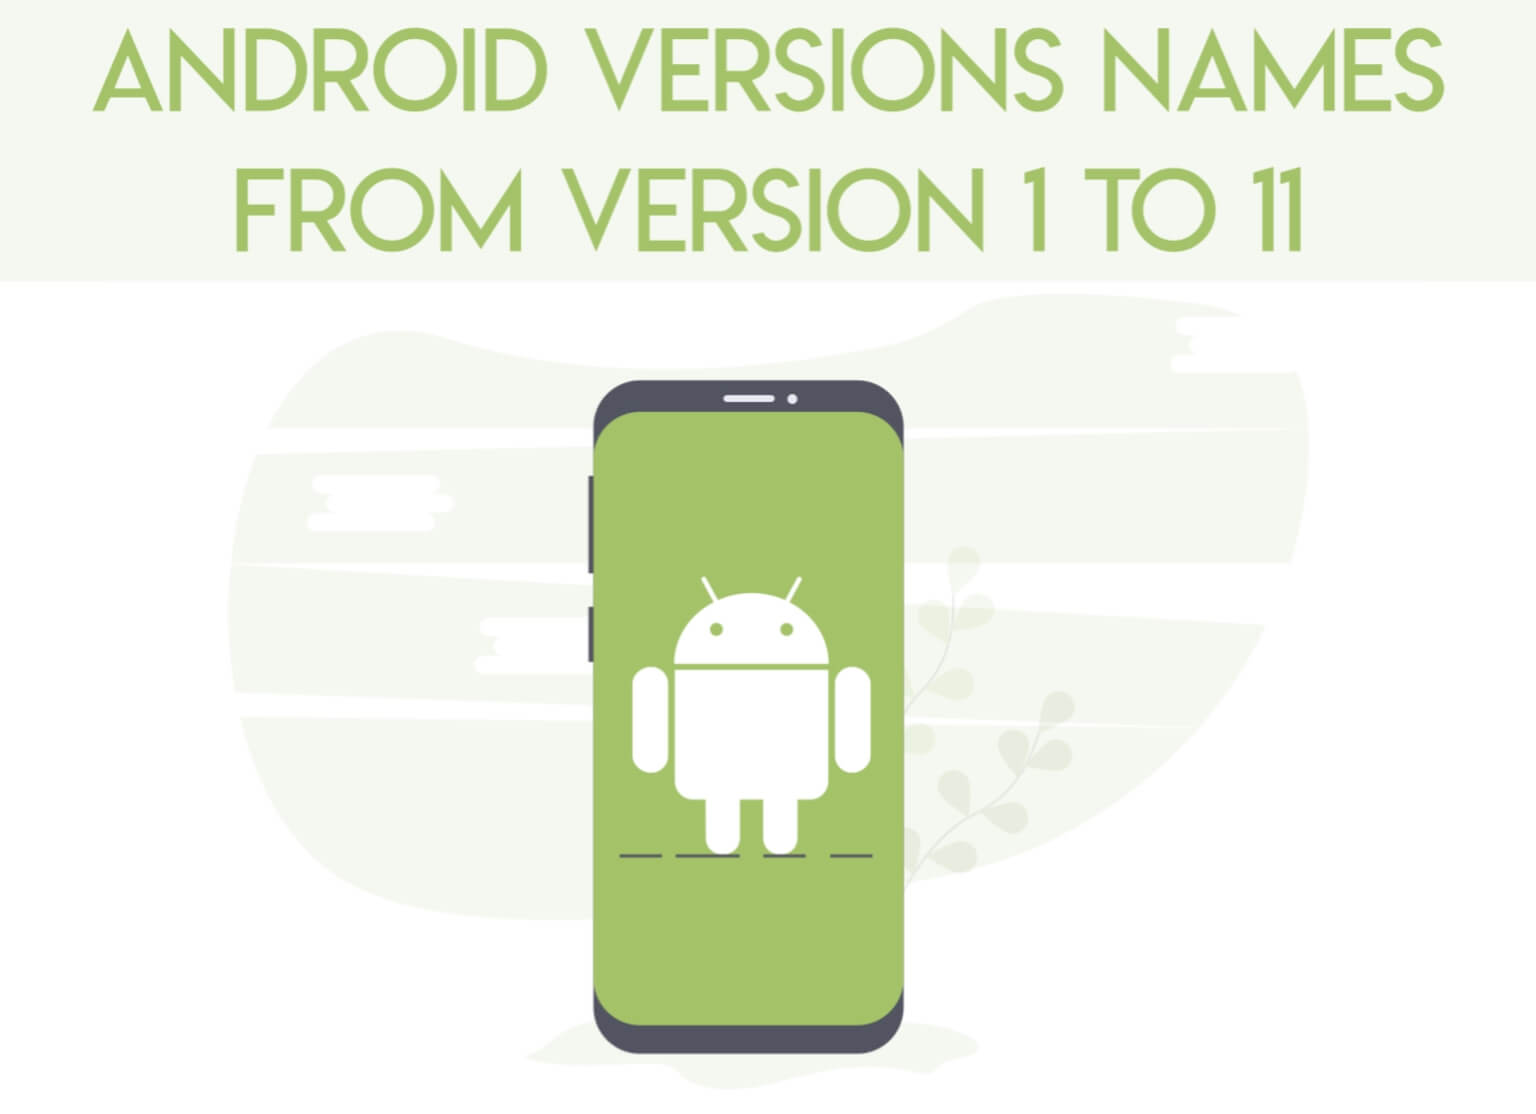 Android Versions Names From Android V. 1 to V. 11